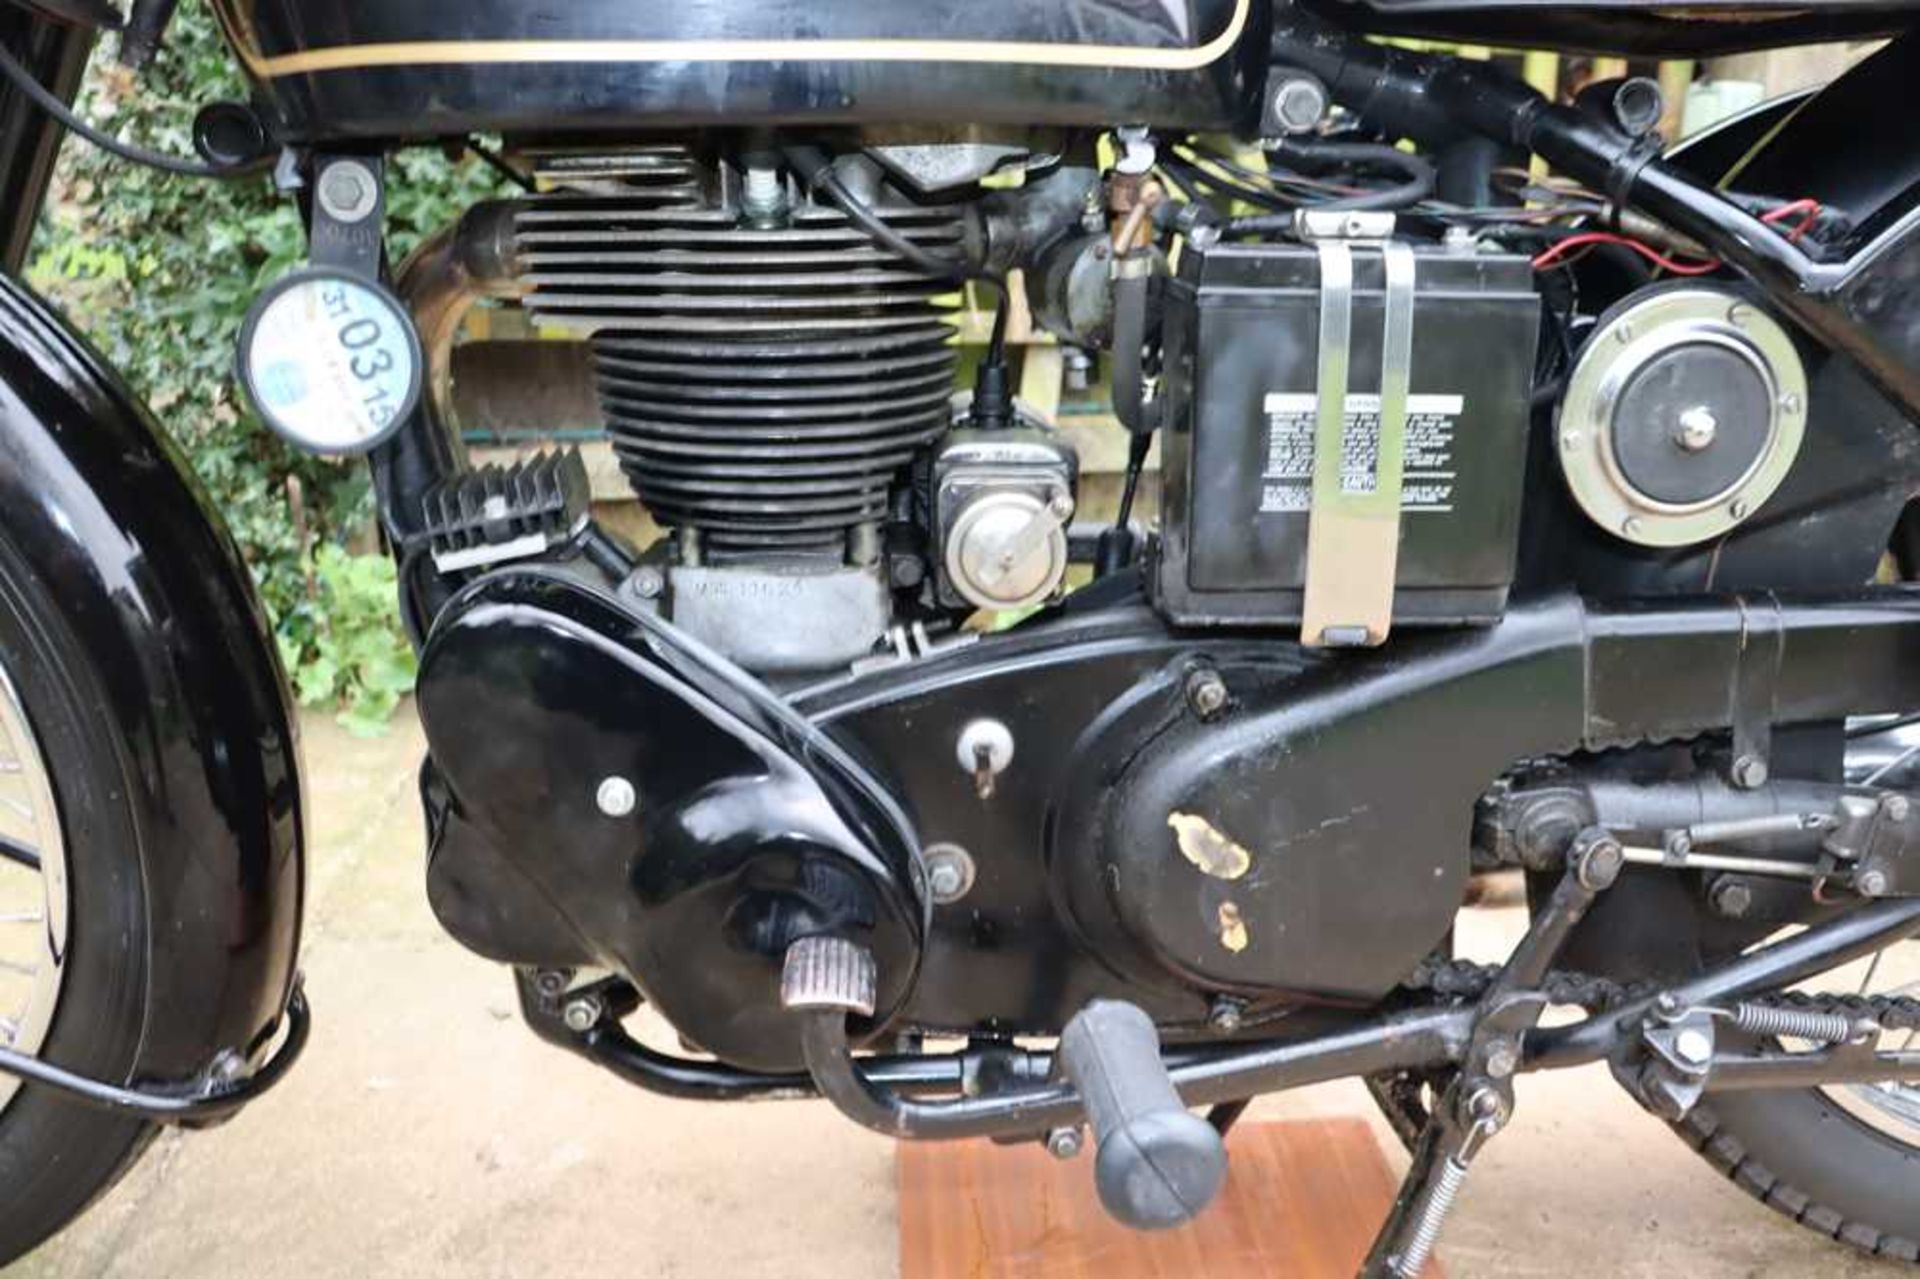 1954 Velocette MSS Fitted with an Alton electric starter kit - Image 26 of 41